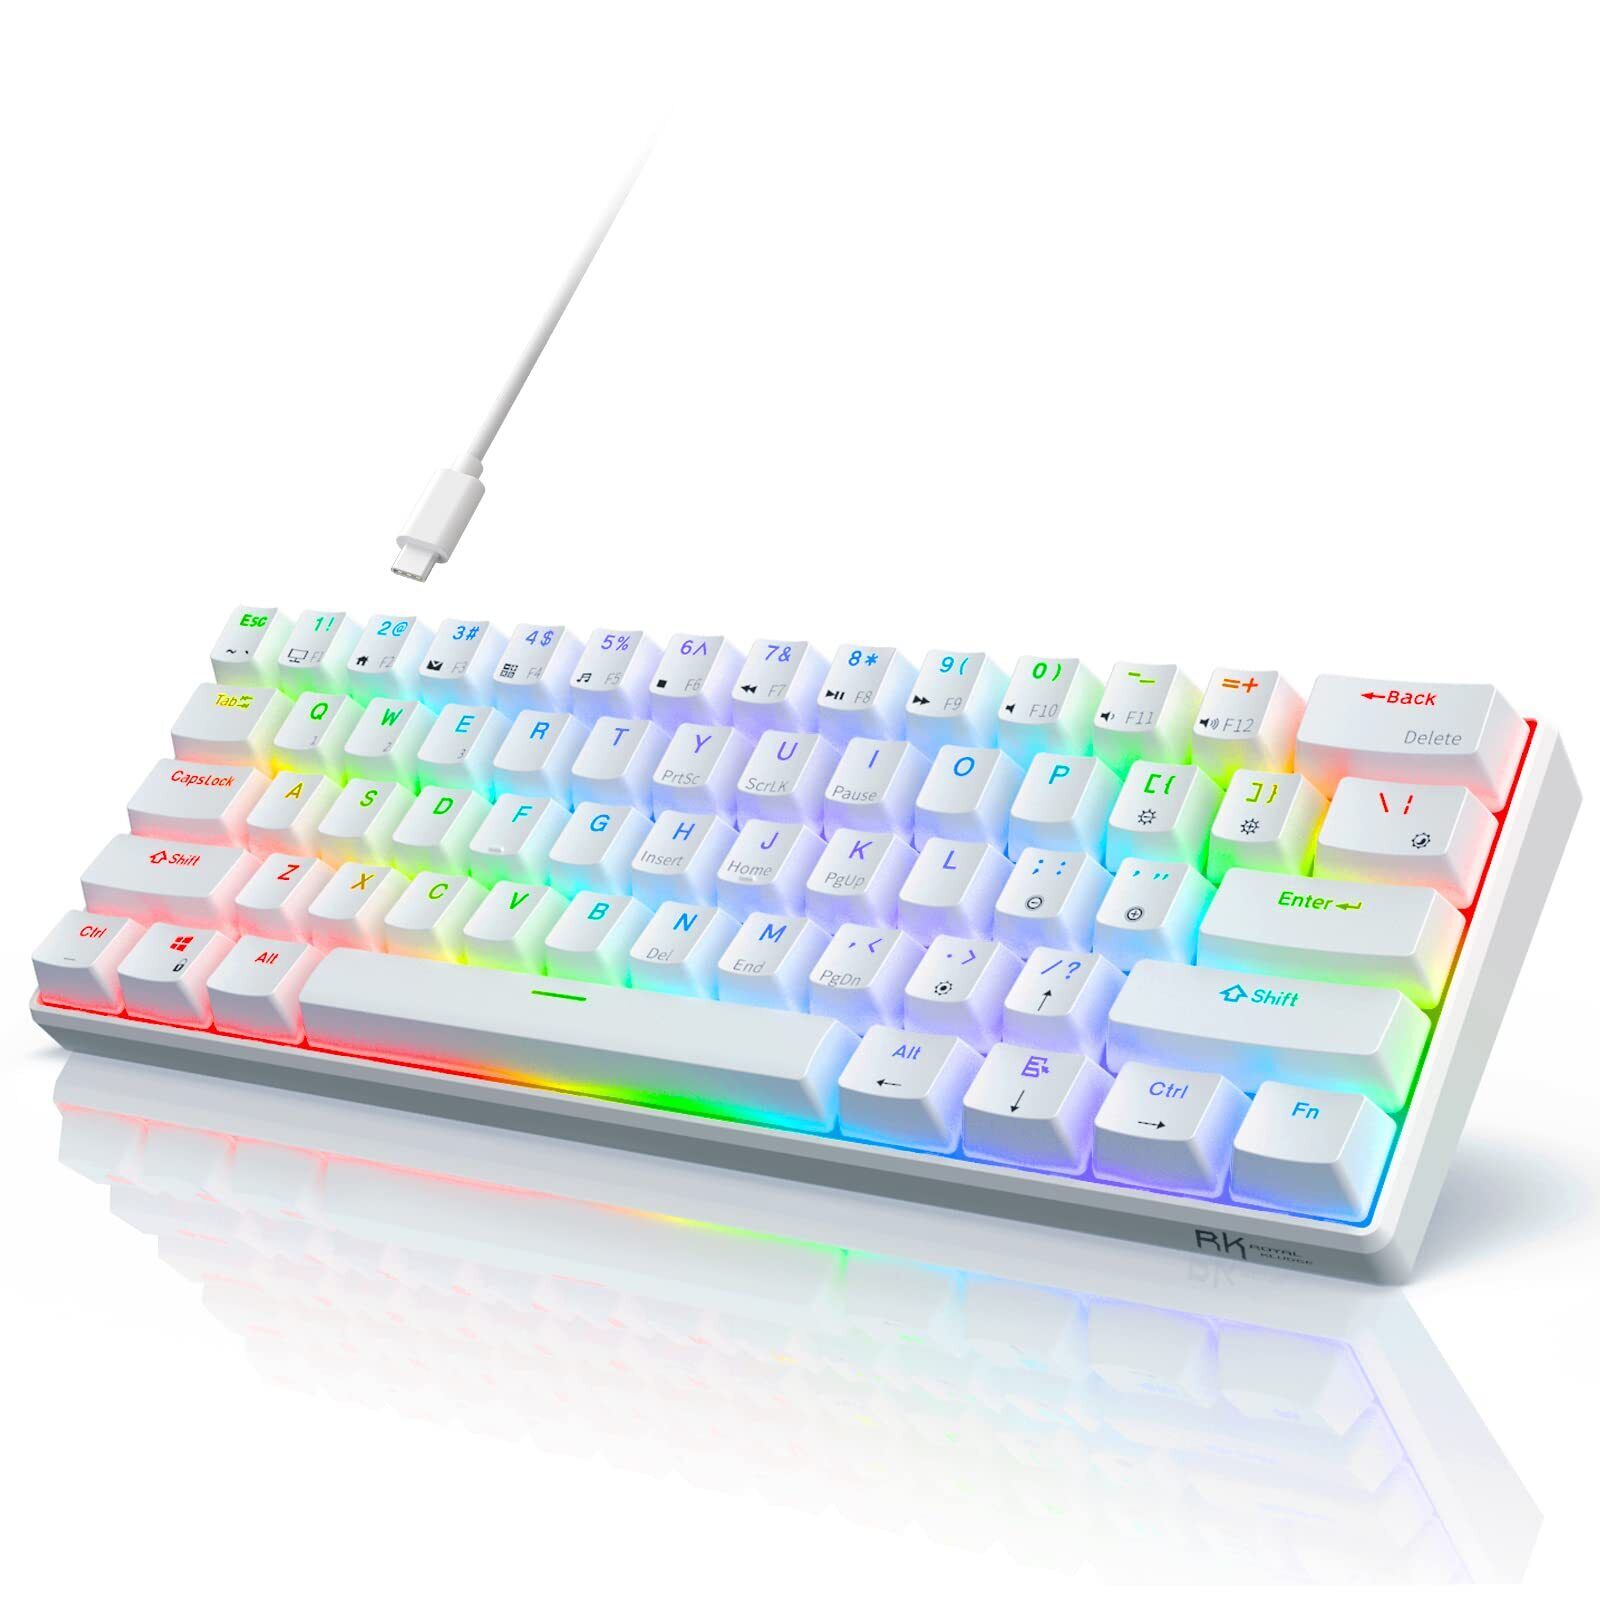 RK ROYAL KLUDGE RK61 Wired 60% Mechanical Gaming Keyboard Programmable White